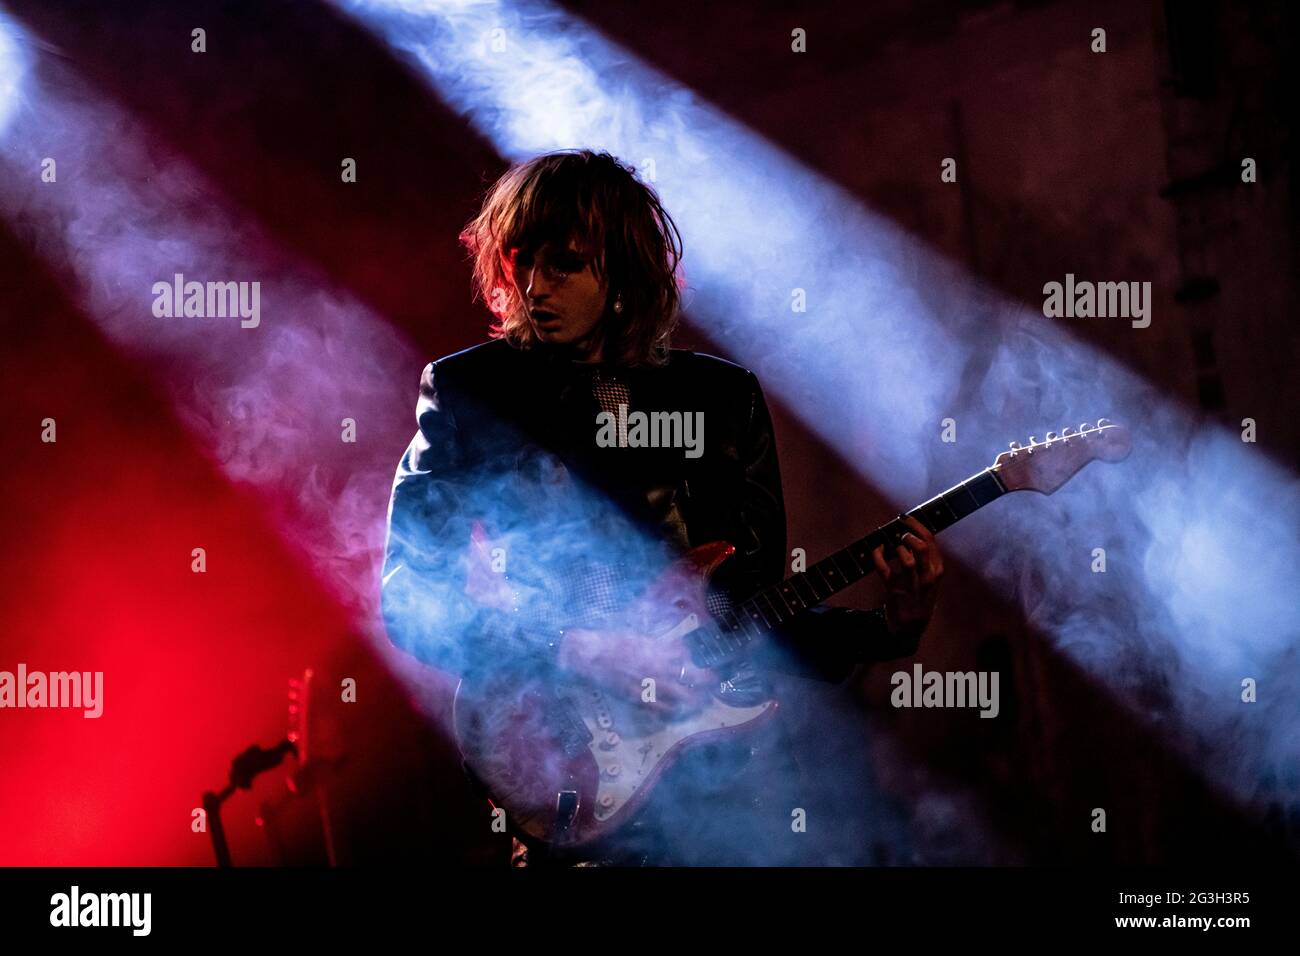 Berlin, Germany. 16th June, 2021. Thomas Raggi of the band Maneskin performs at a live concert for the video portal TikTok at the SchwuZ Queer Club. Credit: Fabian Sommer/dpa/Alamy Live News Stock Photo